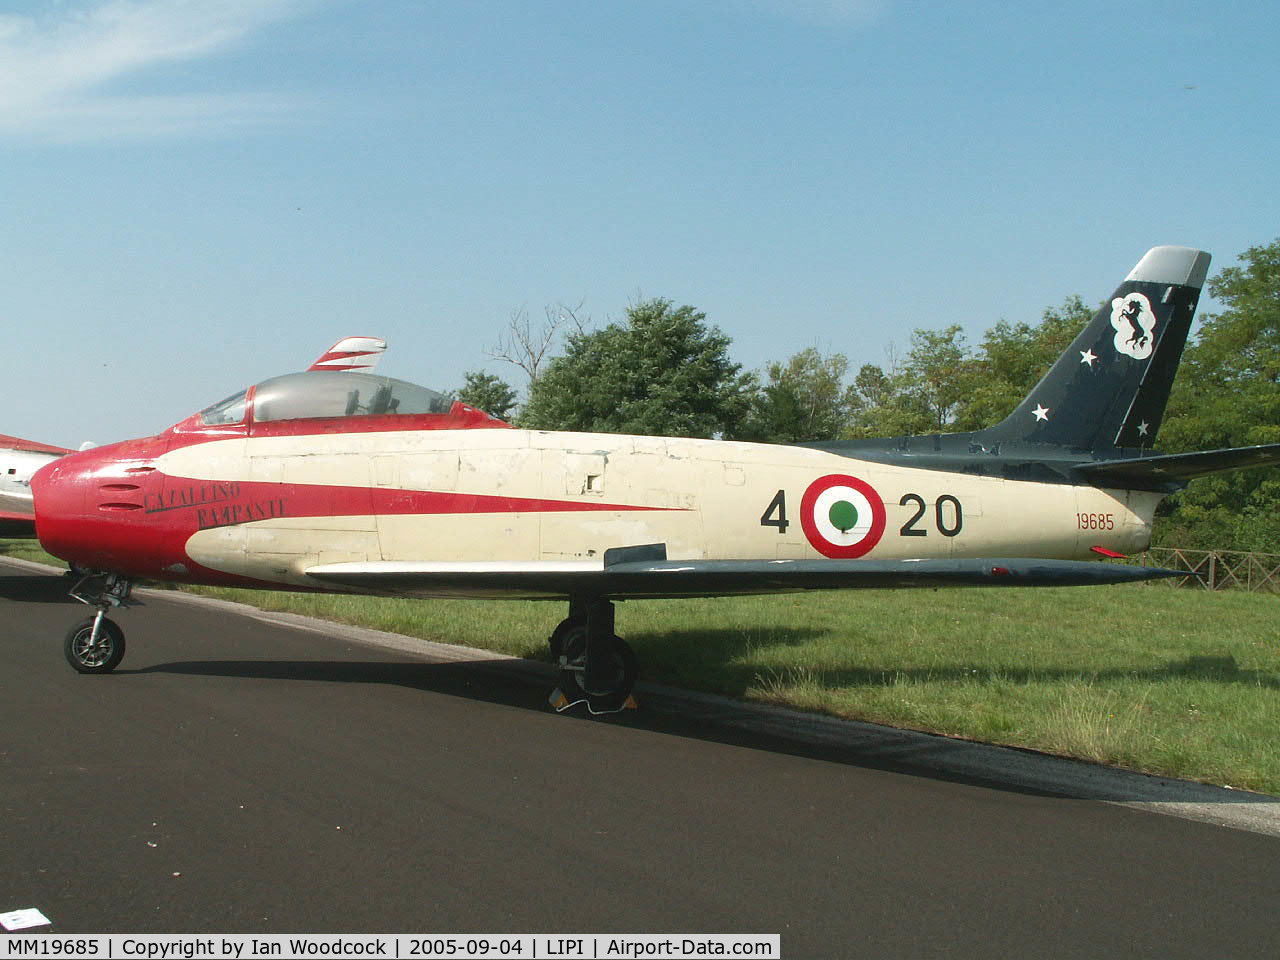 MM19685, Canadair CL-13A Sabre C/N 585, Canadair CL-13A/Preserved/Rivolto-Udine